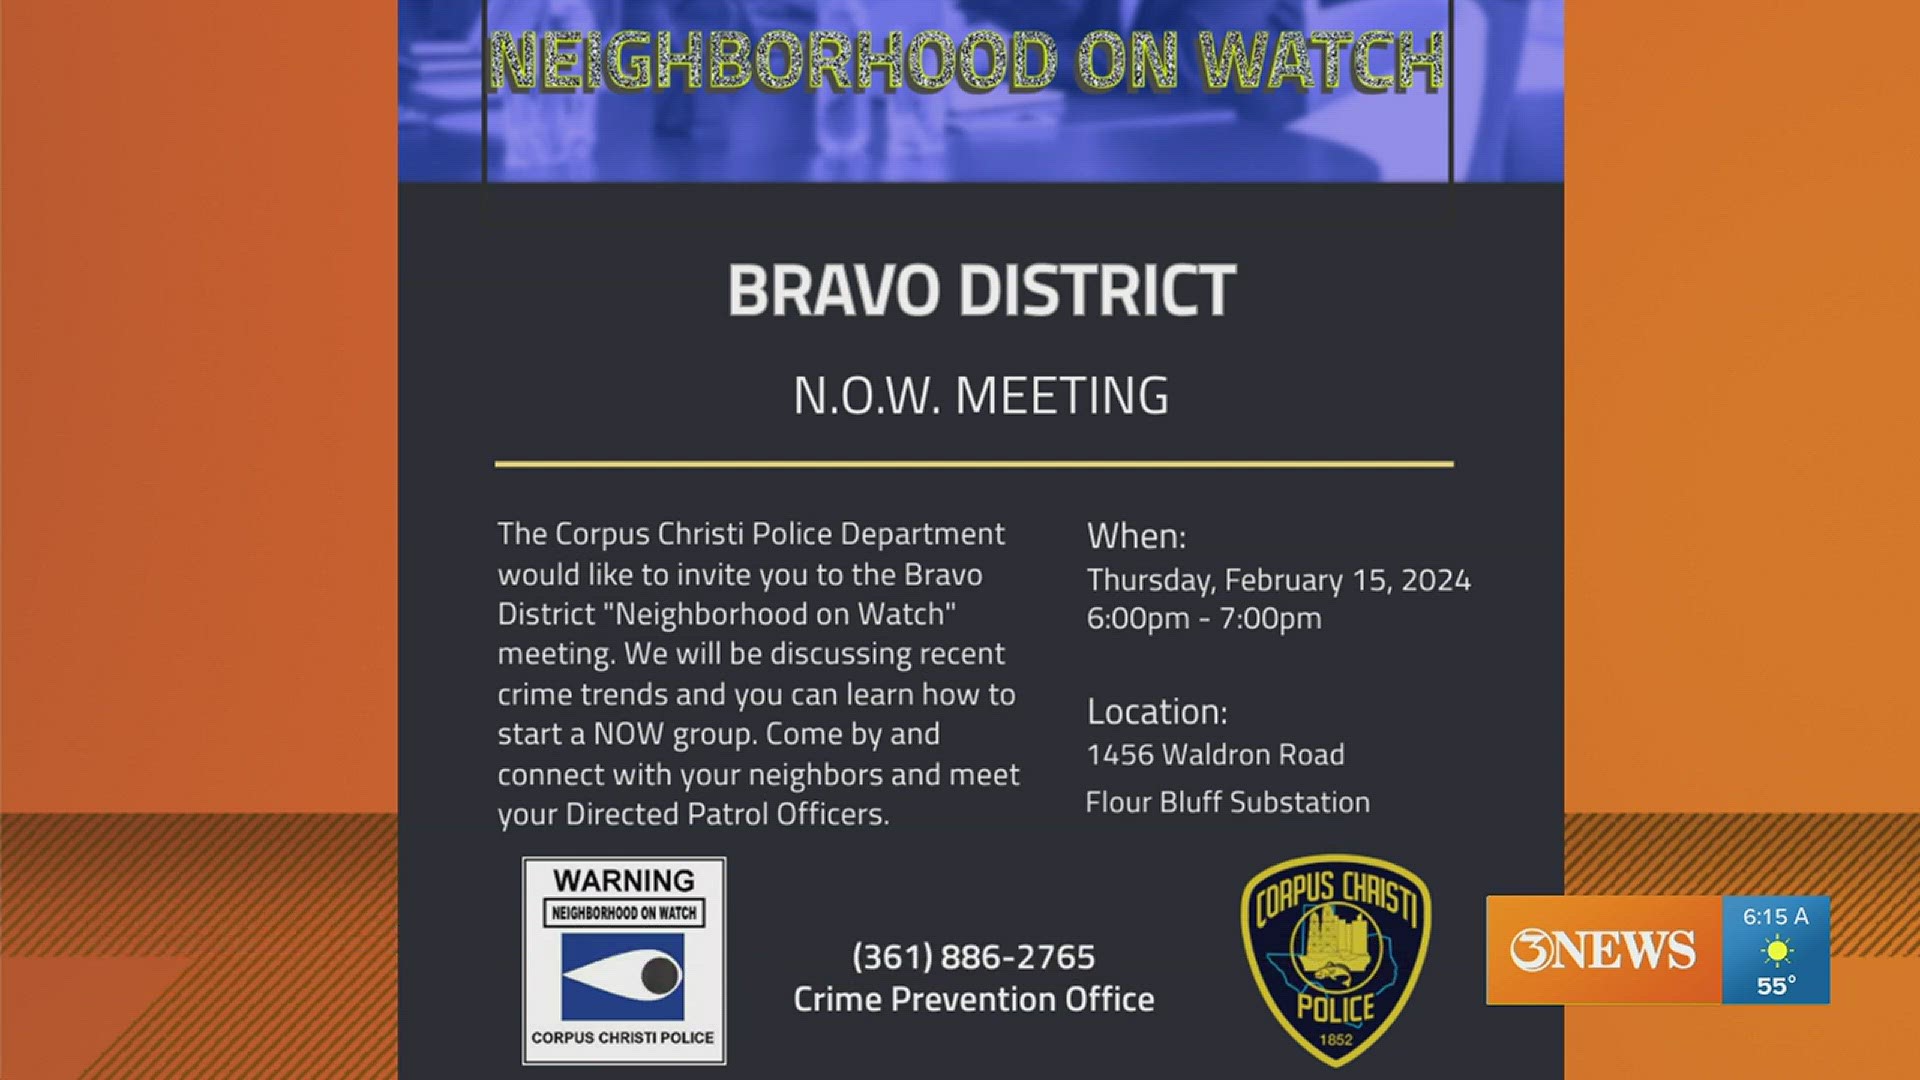 The meeting will take place Thursday, Feb. 15 at the CCPD Flour Bluff Substation on Waldron Road from 6-7p.m.